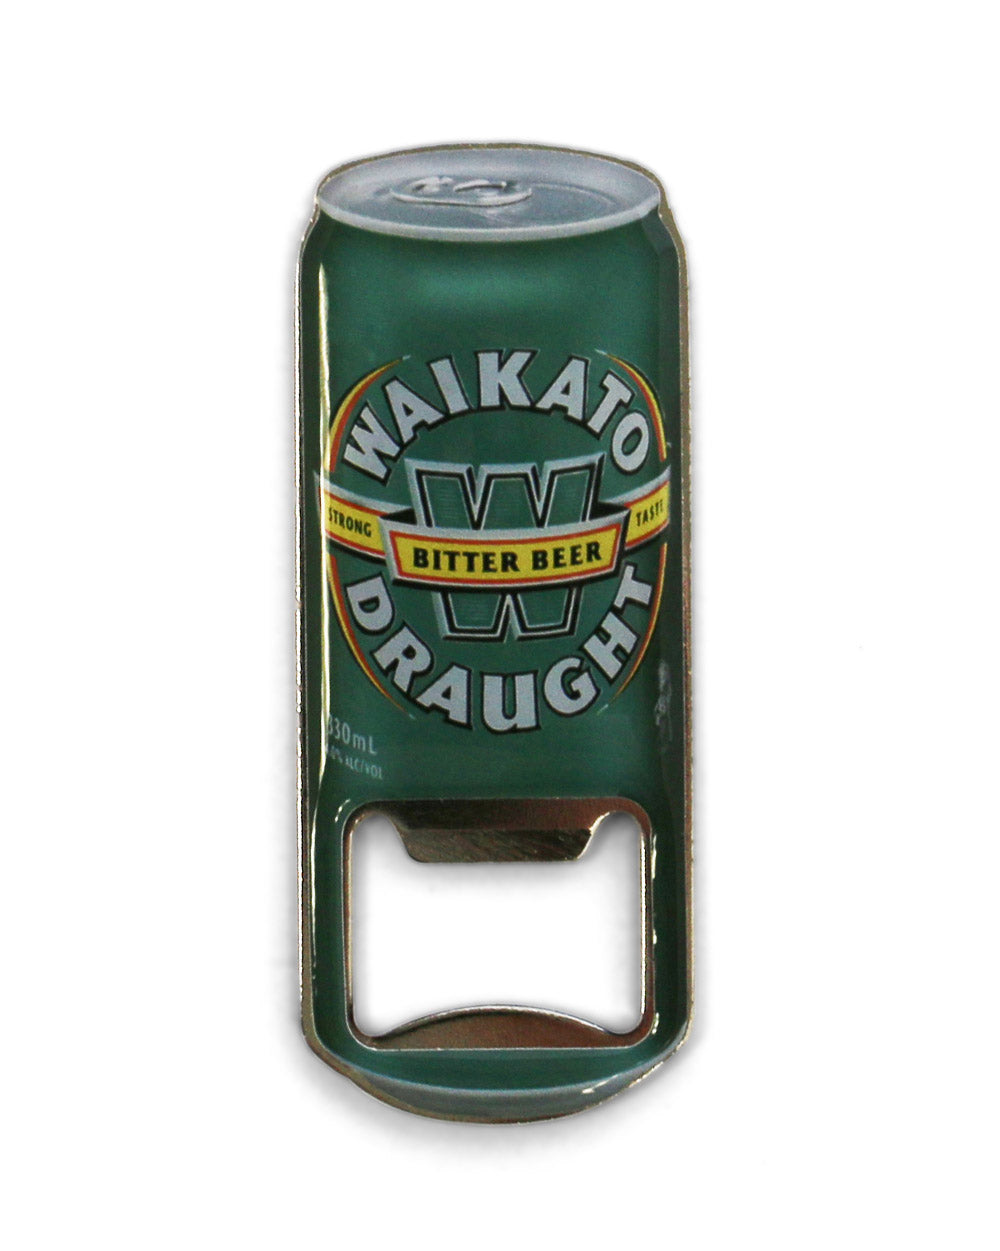 Waikato Draught Bottle Opener -  Beer Gear Apparel & Merchandise - Speights - Lion Red - VB - Tokyo Dy merch